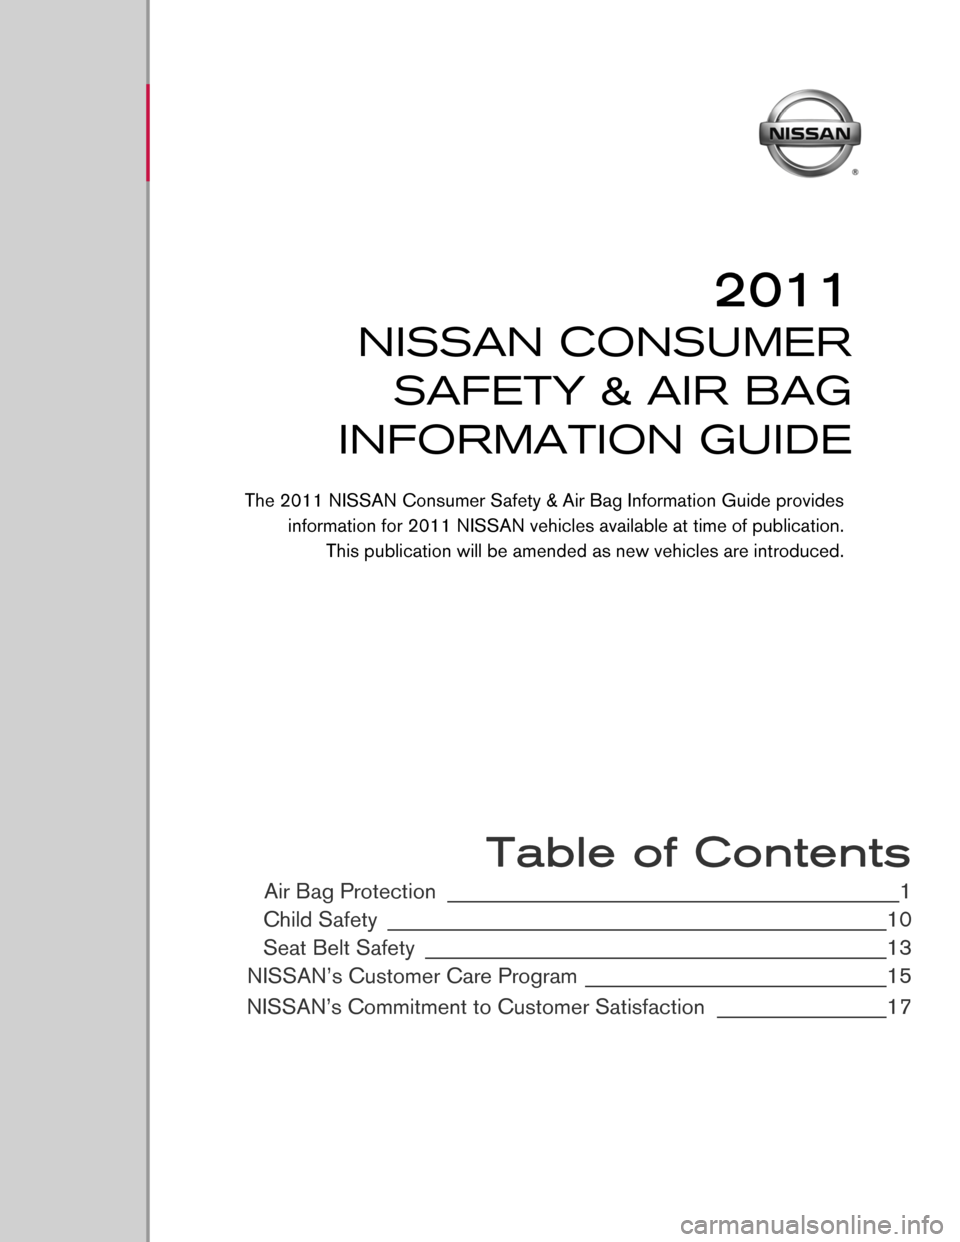 NISSAN ROGUE 2011 1.G Consumer Safety Air Bag Information Guide  
 
 
 
 
 
 
 
 
 
 
 
 
 
 
 
 
 
 
 
 
 
 
 Table of Contents
Air Bag Protection ________________________________________________1
Child Safety
 ____________________________________________________